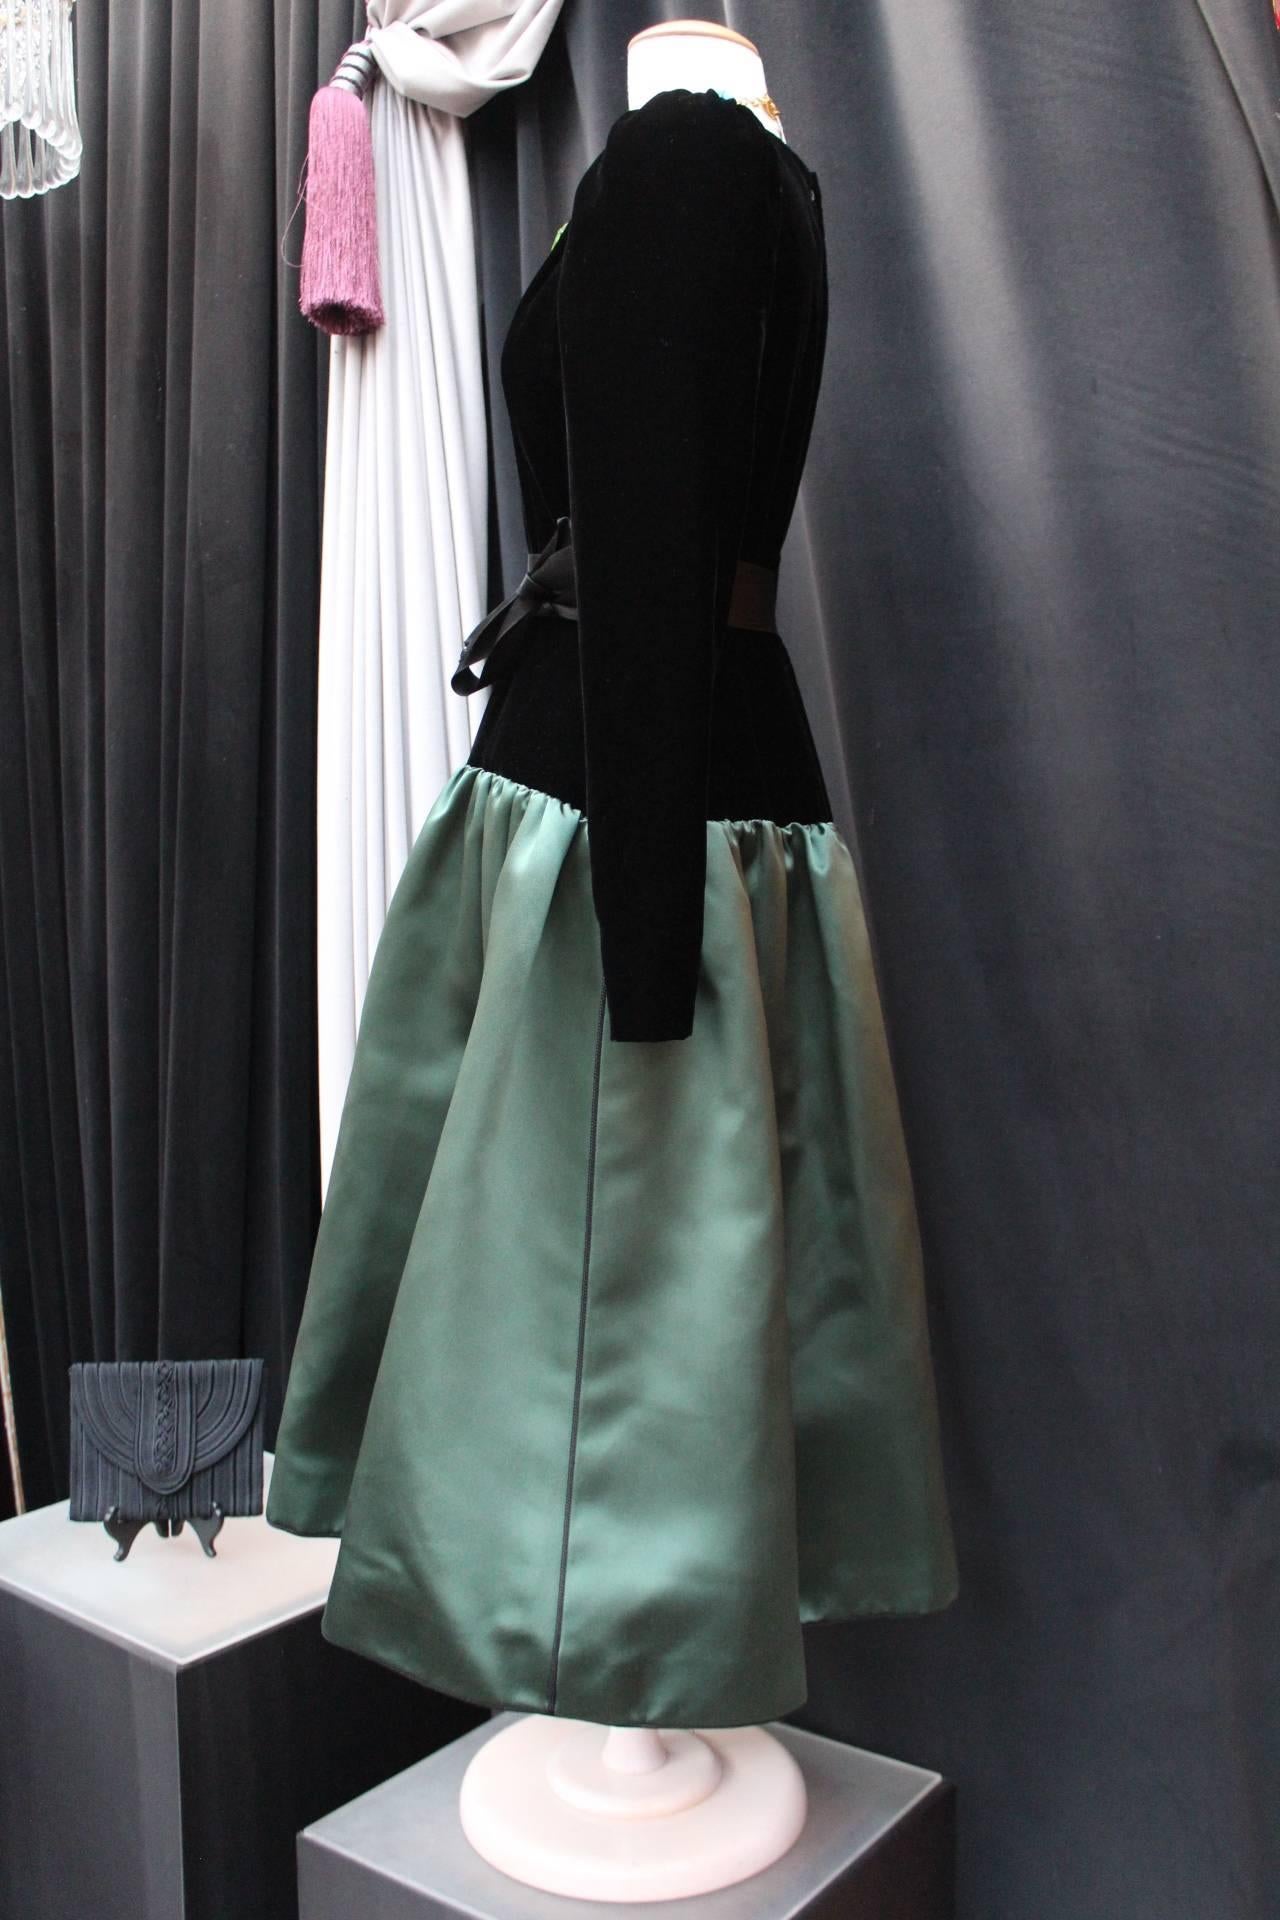 YVES SAINT LAURENT HAUTE COUTURE PARIS (Made in France) 1978 evening dress consisting of a black silk velvet with long sleeves bust and a green silk taffeta pleated skirt. The dress is constructed with a V-neck, slightly puffed shoulders and small